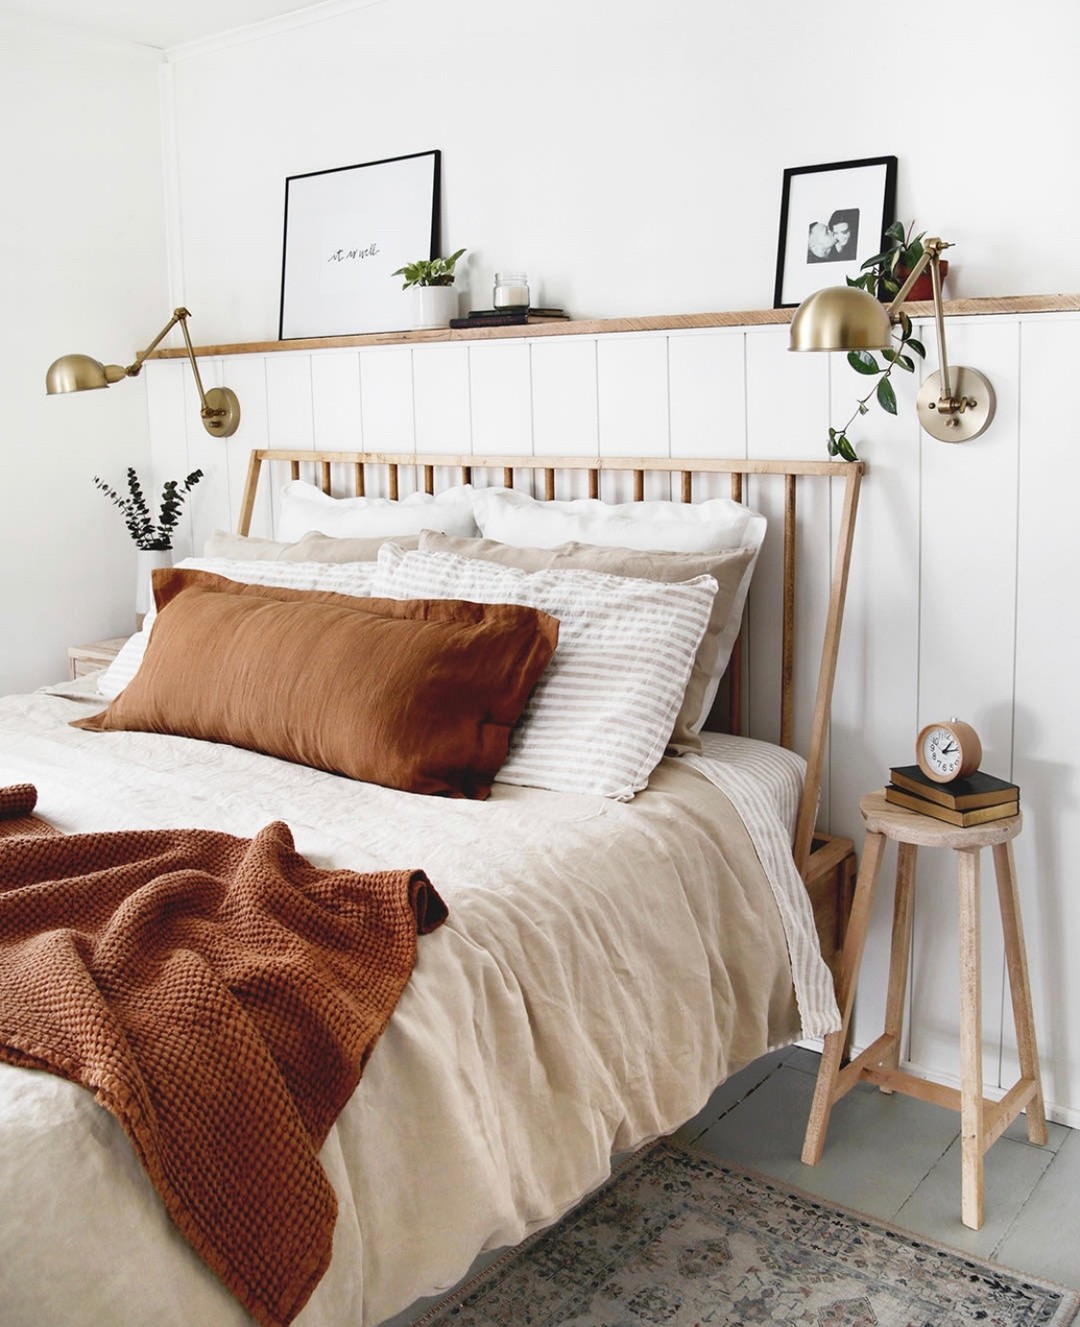 bedroom focusing on a simple yet elegant vertical strips wooden headboard, styled with wall lamps on each side of the bed and layered pillows and matching bedding